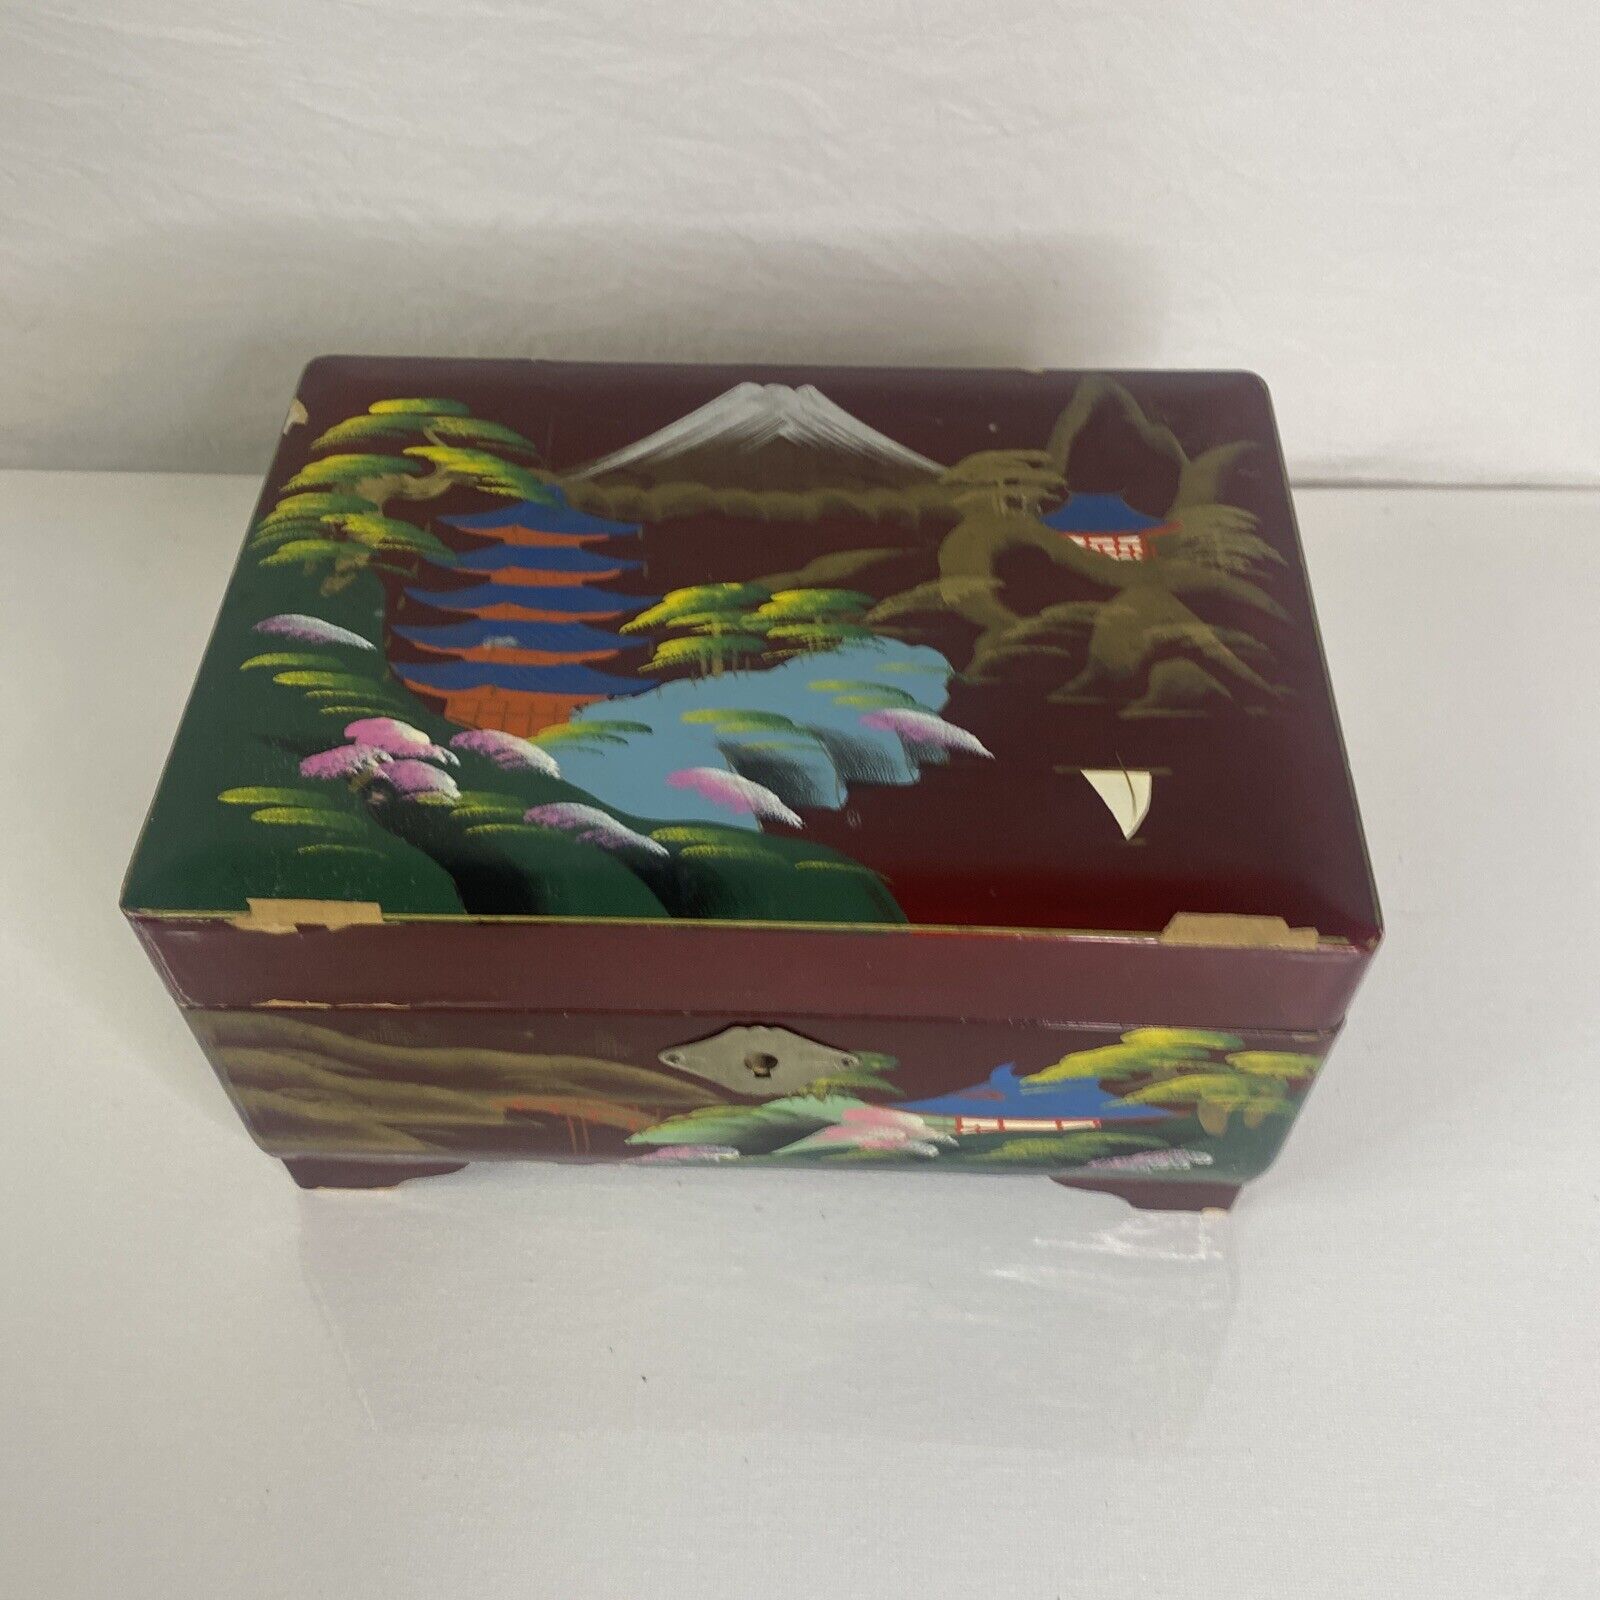 VTG Hand Painted Wood Lacquer Music Jewelry Box Footed, Works. VTG 1950’s